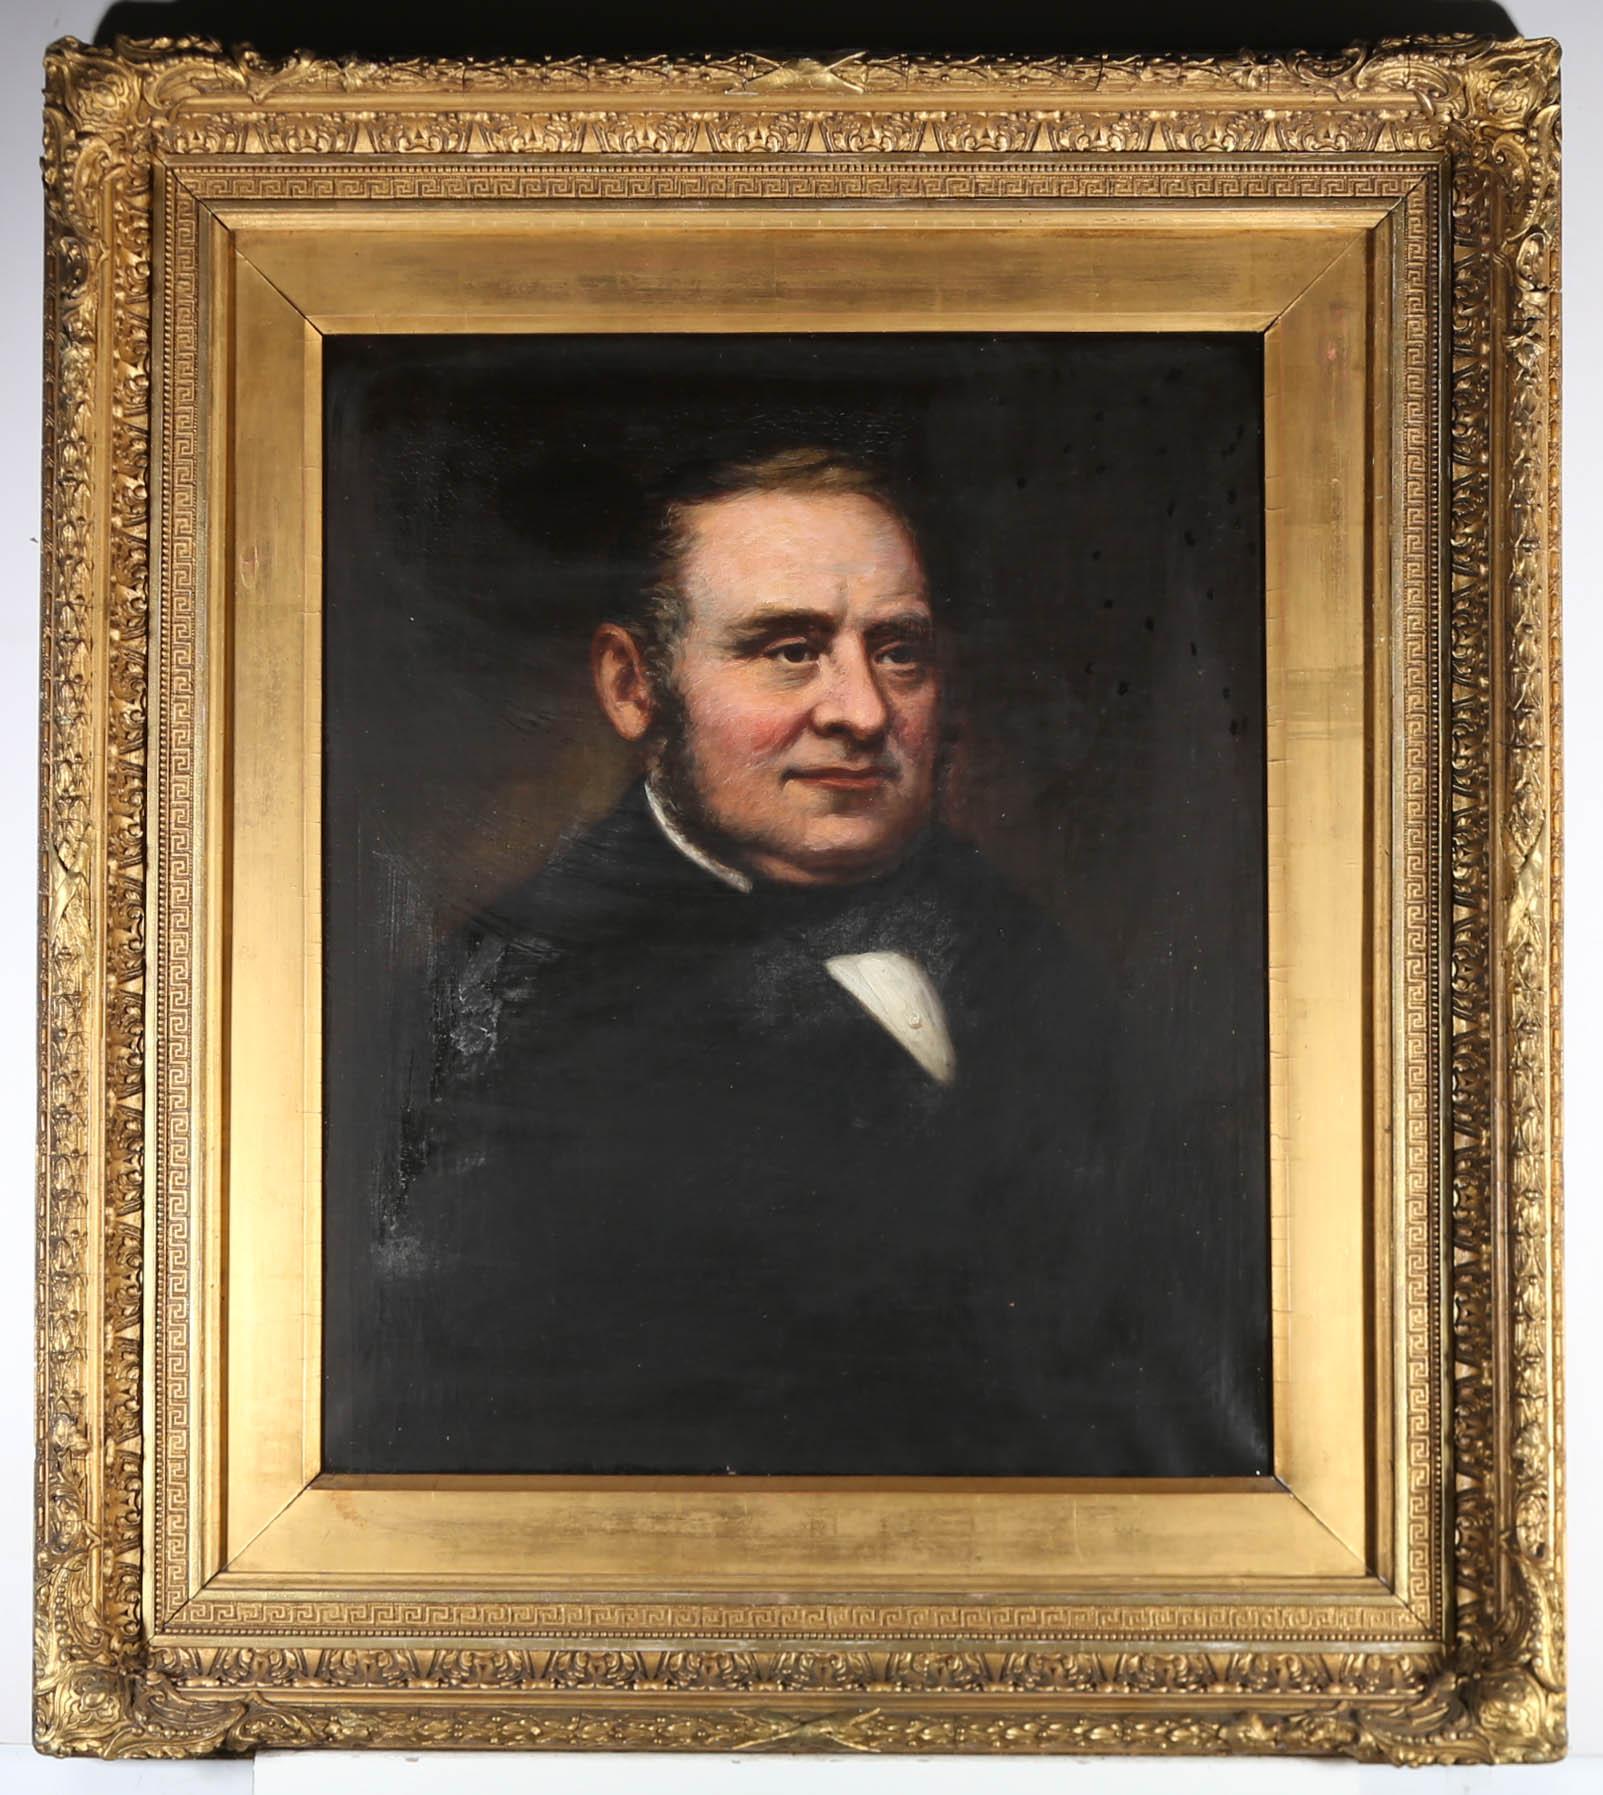 A fine Victorian portrait of a well dressed, portly gentleman. Hi rosy complexion, full face and crisp clothes show him to be a man of stature. The painting is unsigned and handsomely presented in a very fine 19th Century gilt frame, boasting swept